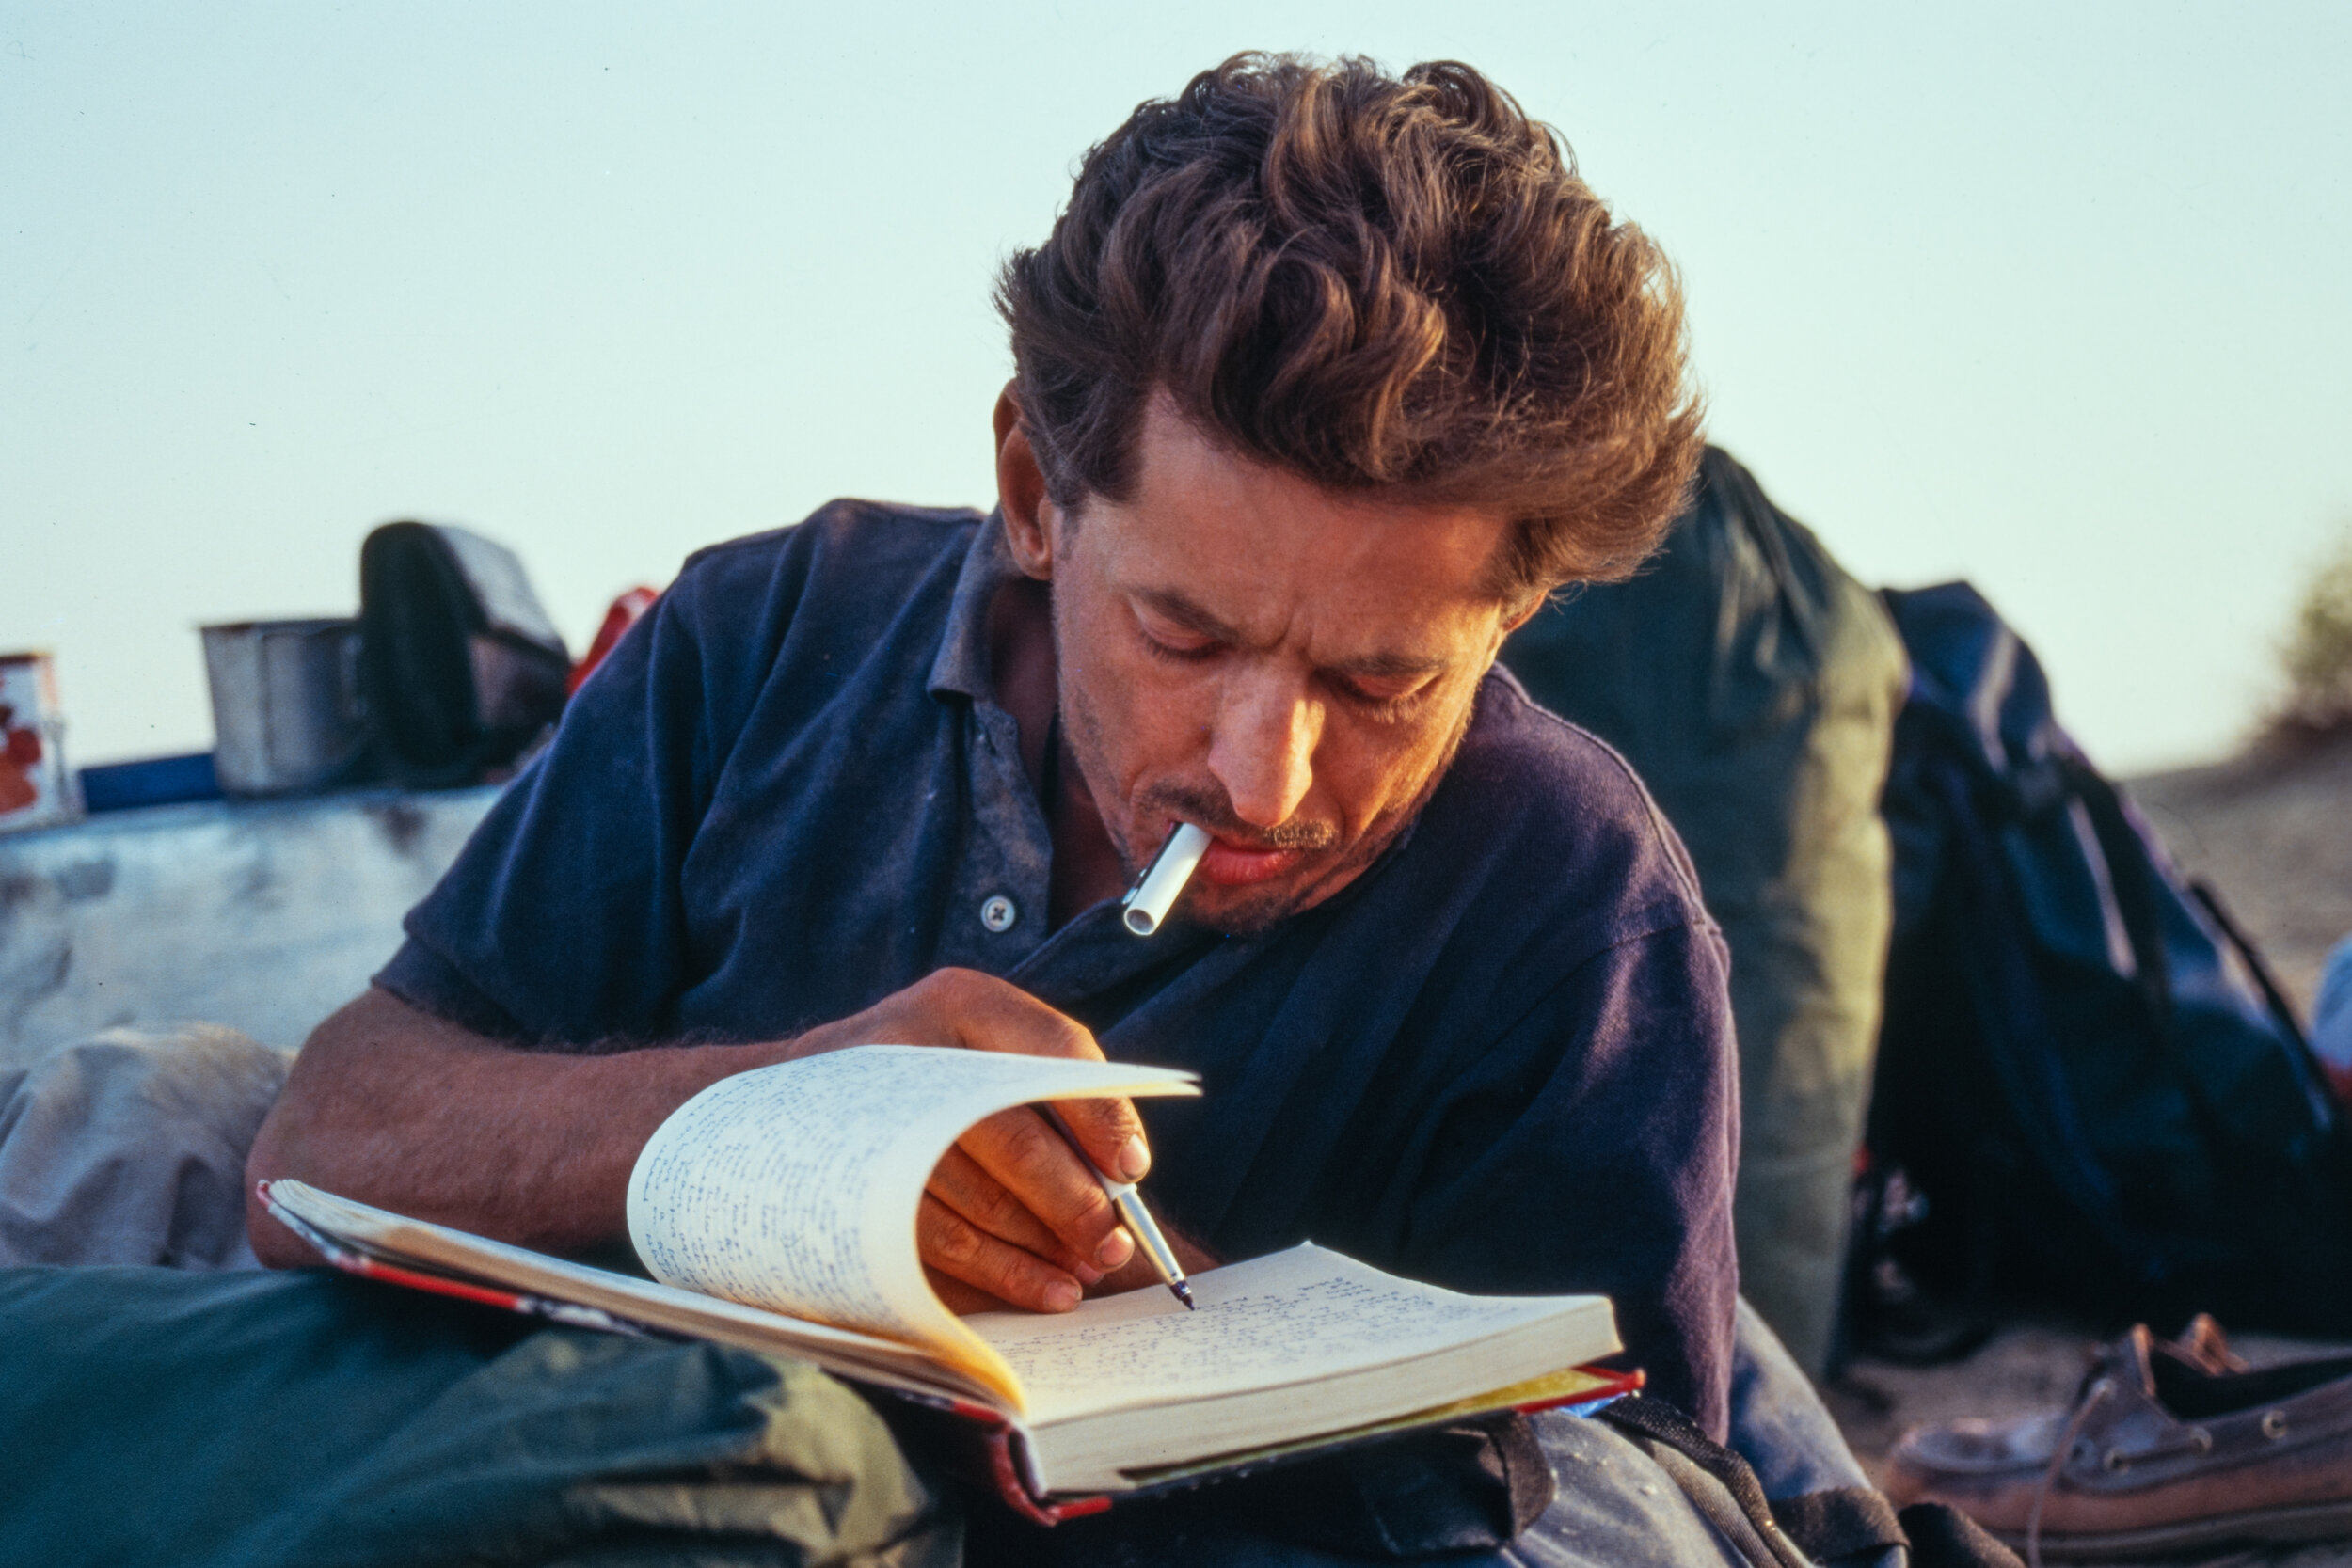  Richard writing in his journal. I’ve never been consistent with journaling but I was on the expedition and I am so grateful that I was. It is fascinating to read back on my experiences and thoughts.  